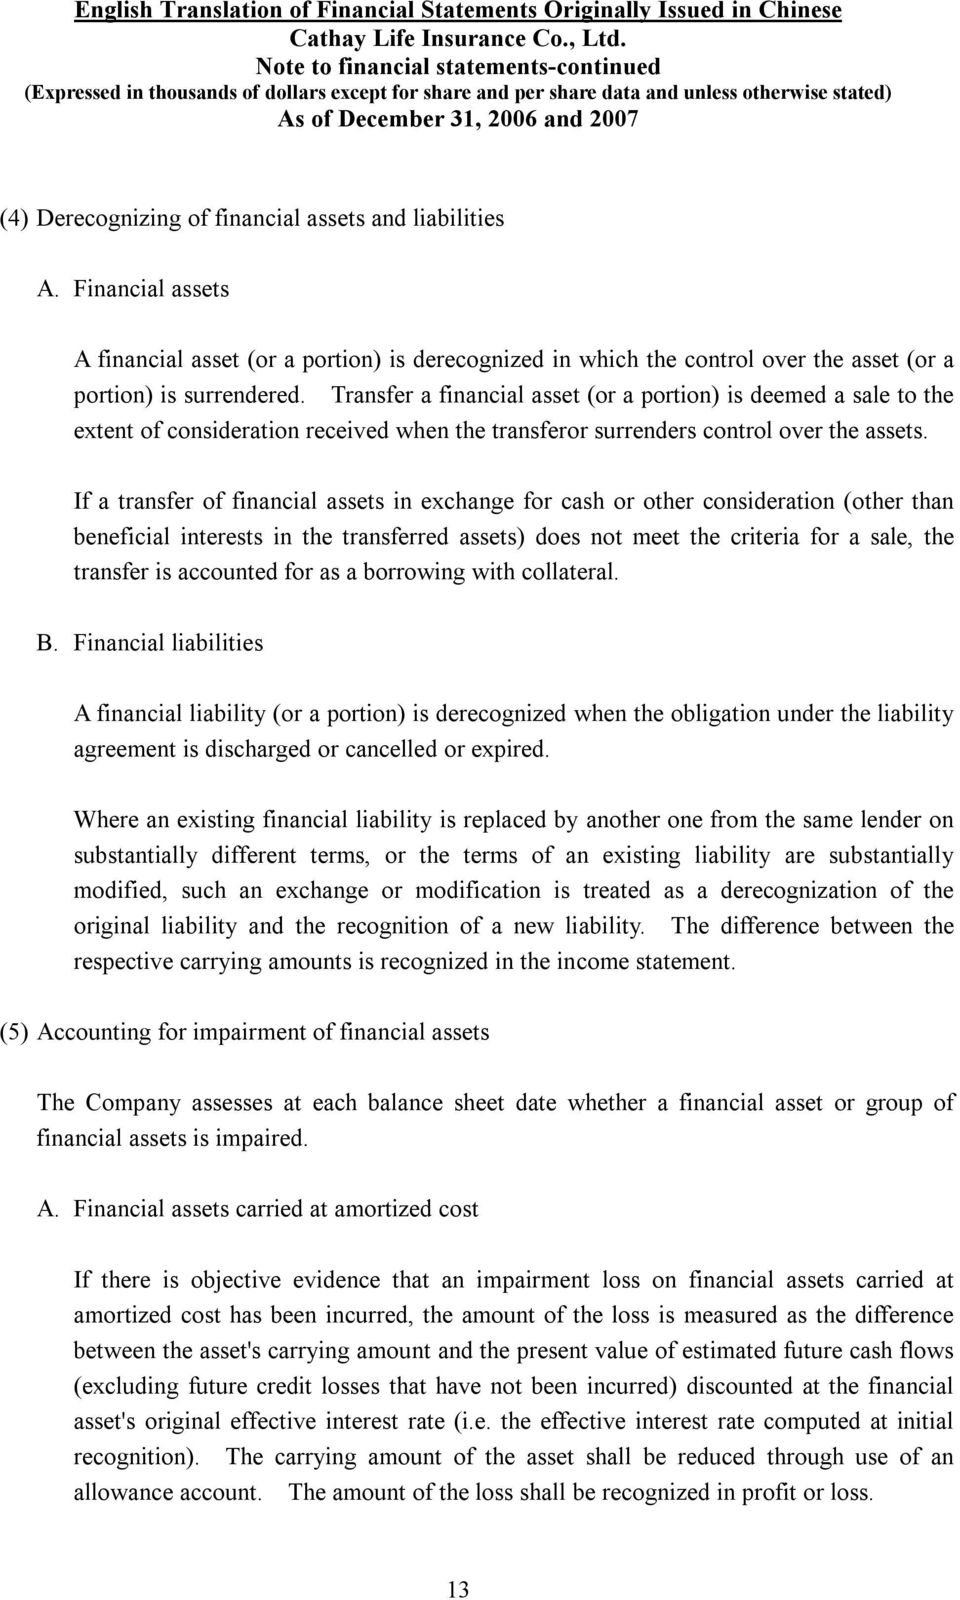 If a transfer of financial assets in exchange for cash or other consideration (other than beneficial interests in the transferred assets) does not meet the criteria for a sale, the transfer is